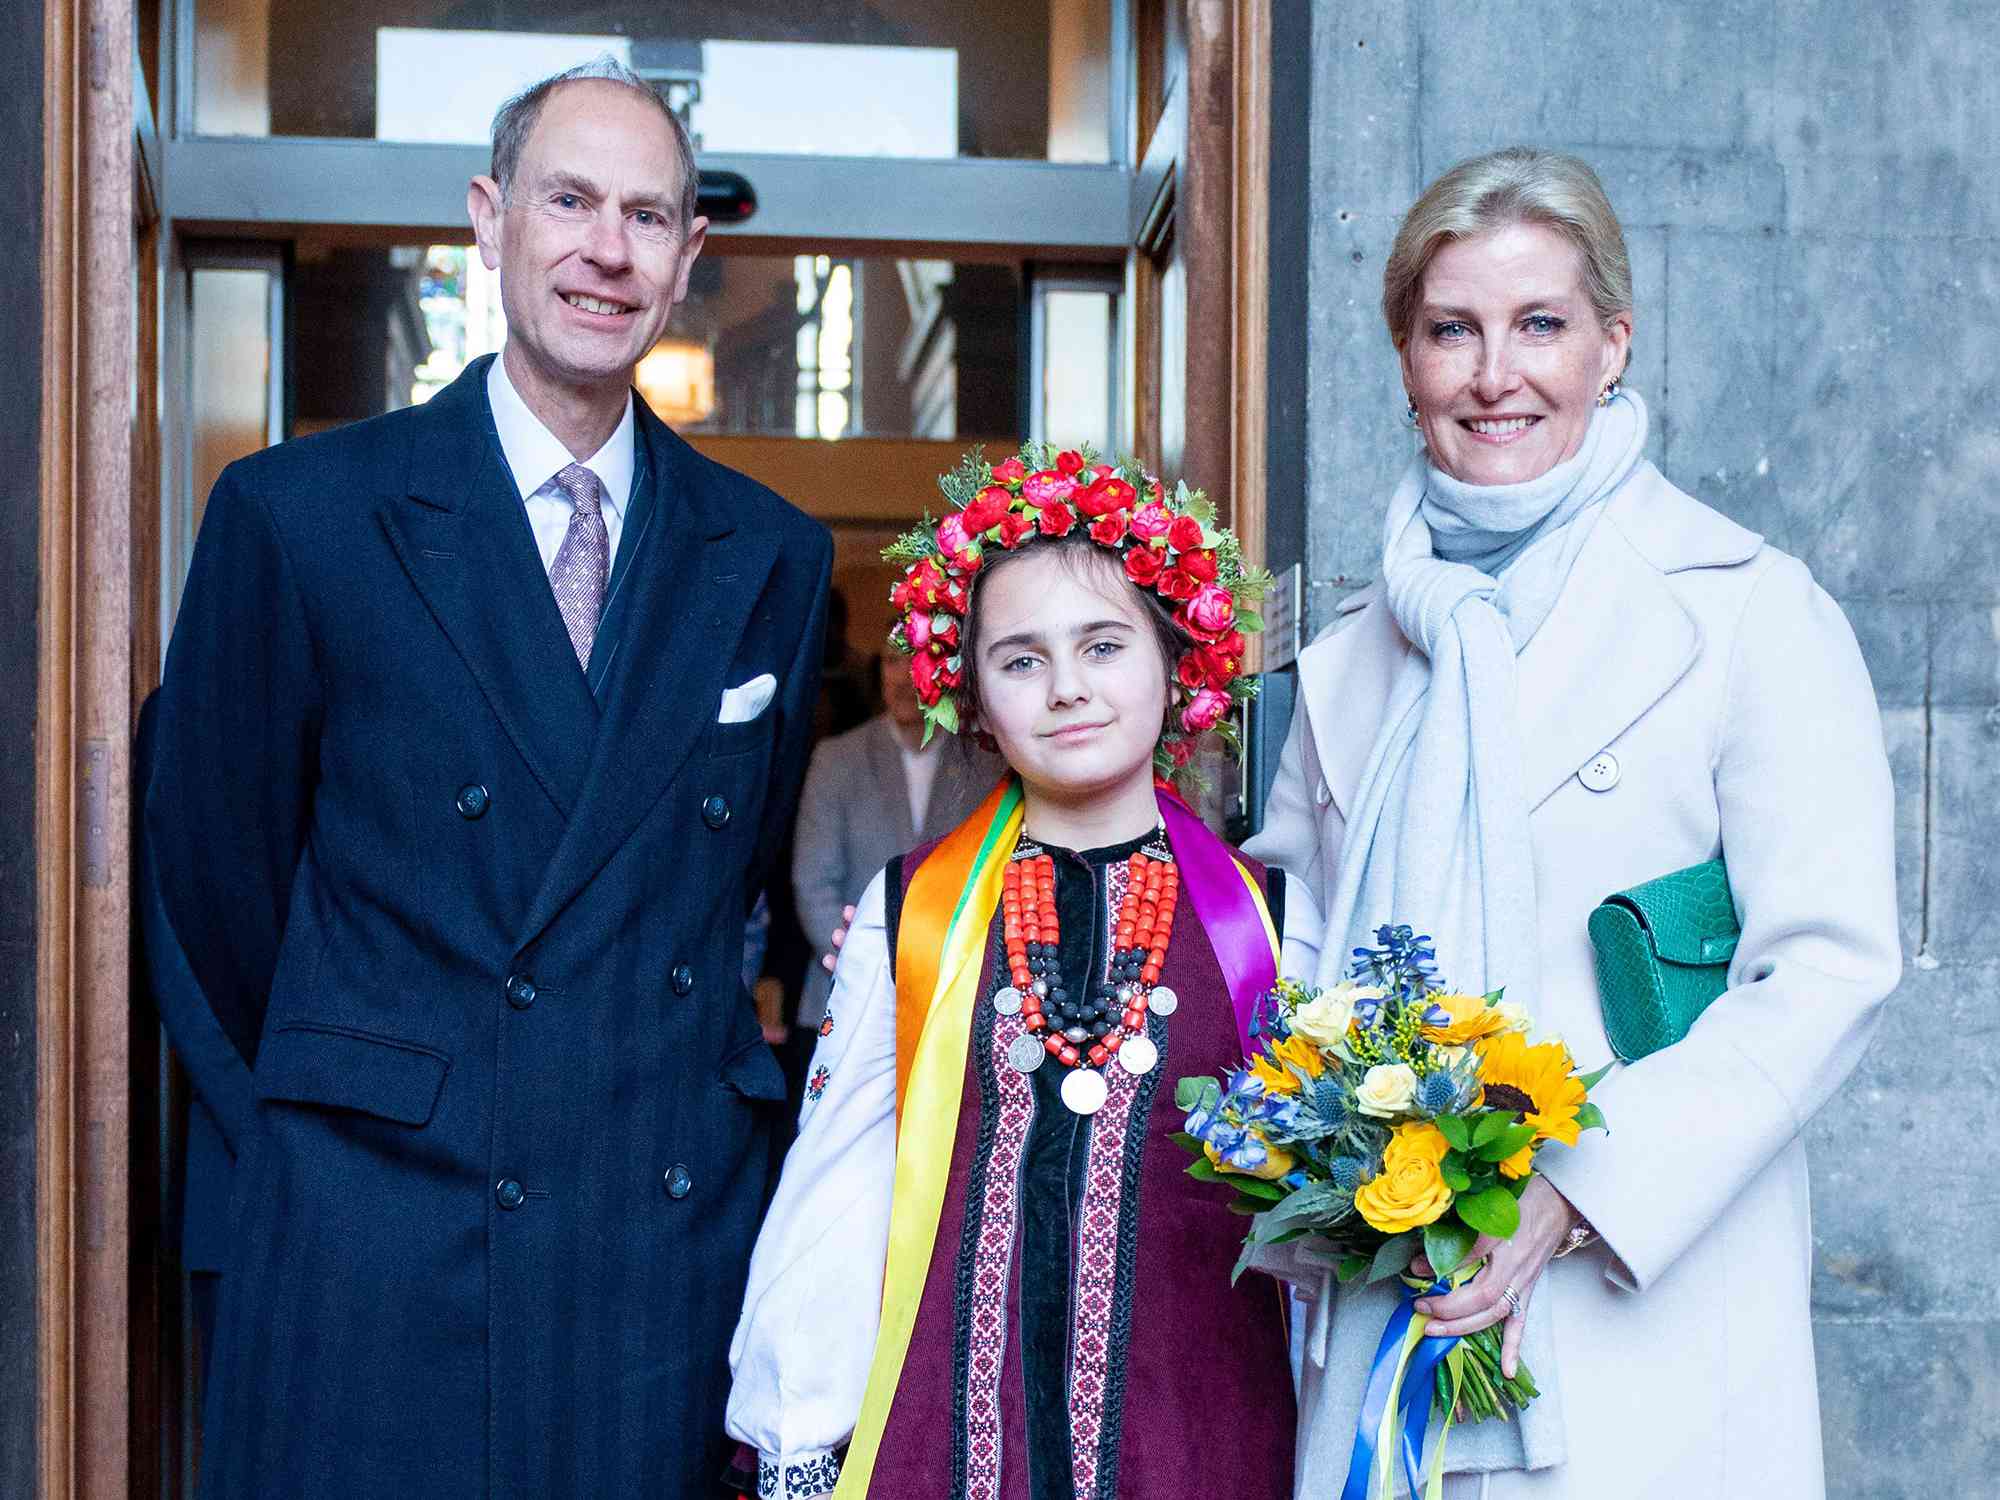 Britain's Prince Edward, Duke of Edinburgh (L) and Britain's Sophie, Duchess of Edinburgh (R) pose for a photograph with Marianna Melnyk, aged 10, from the Ukrainian community at the City Chambers in Edinburgh